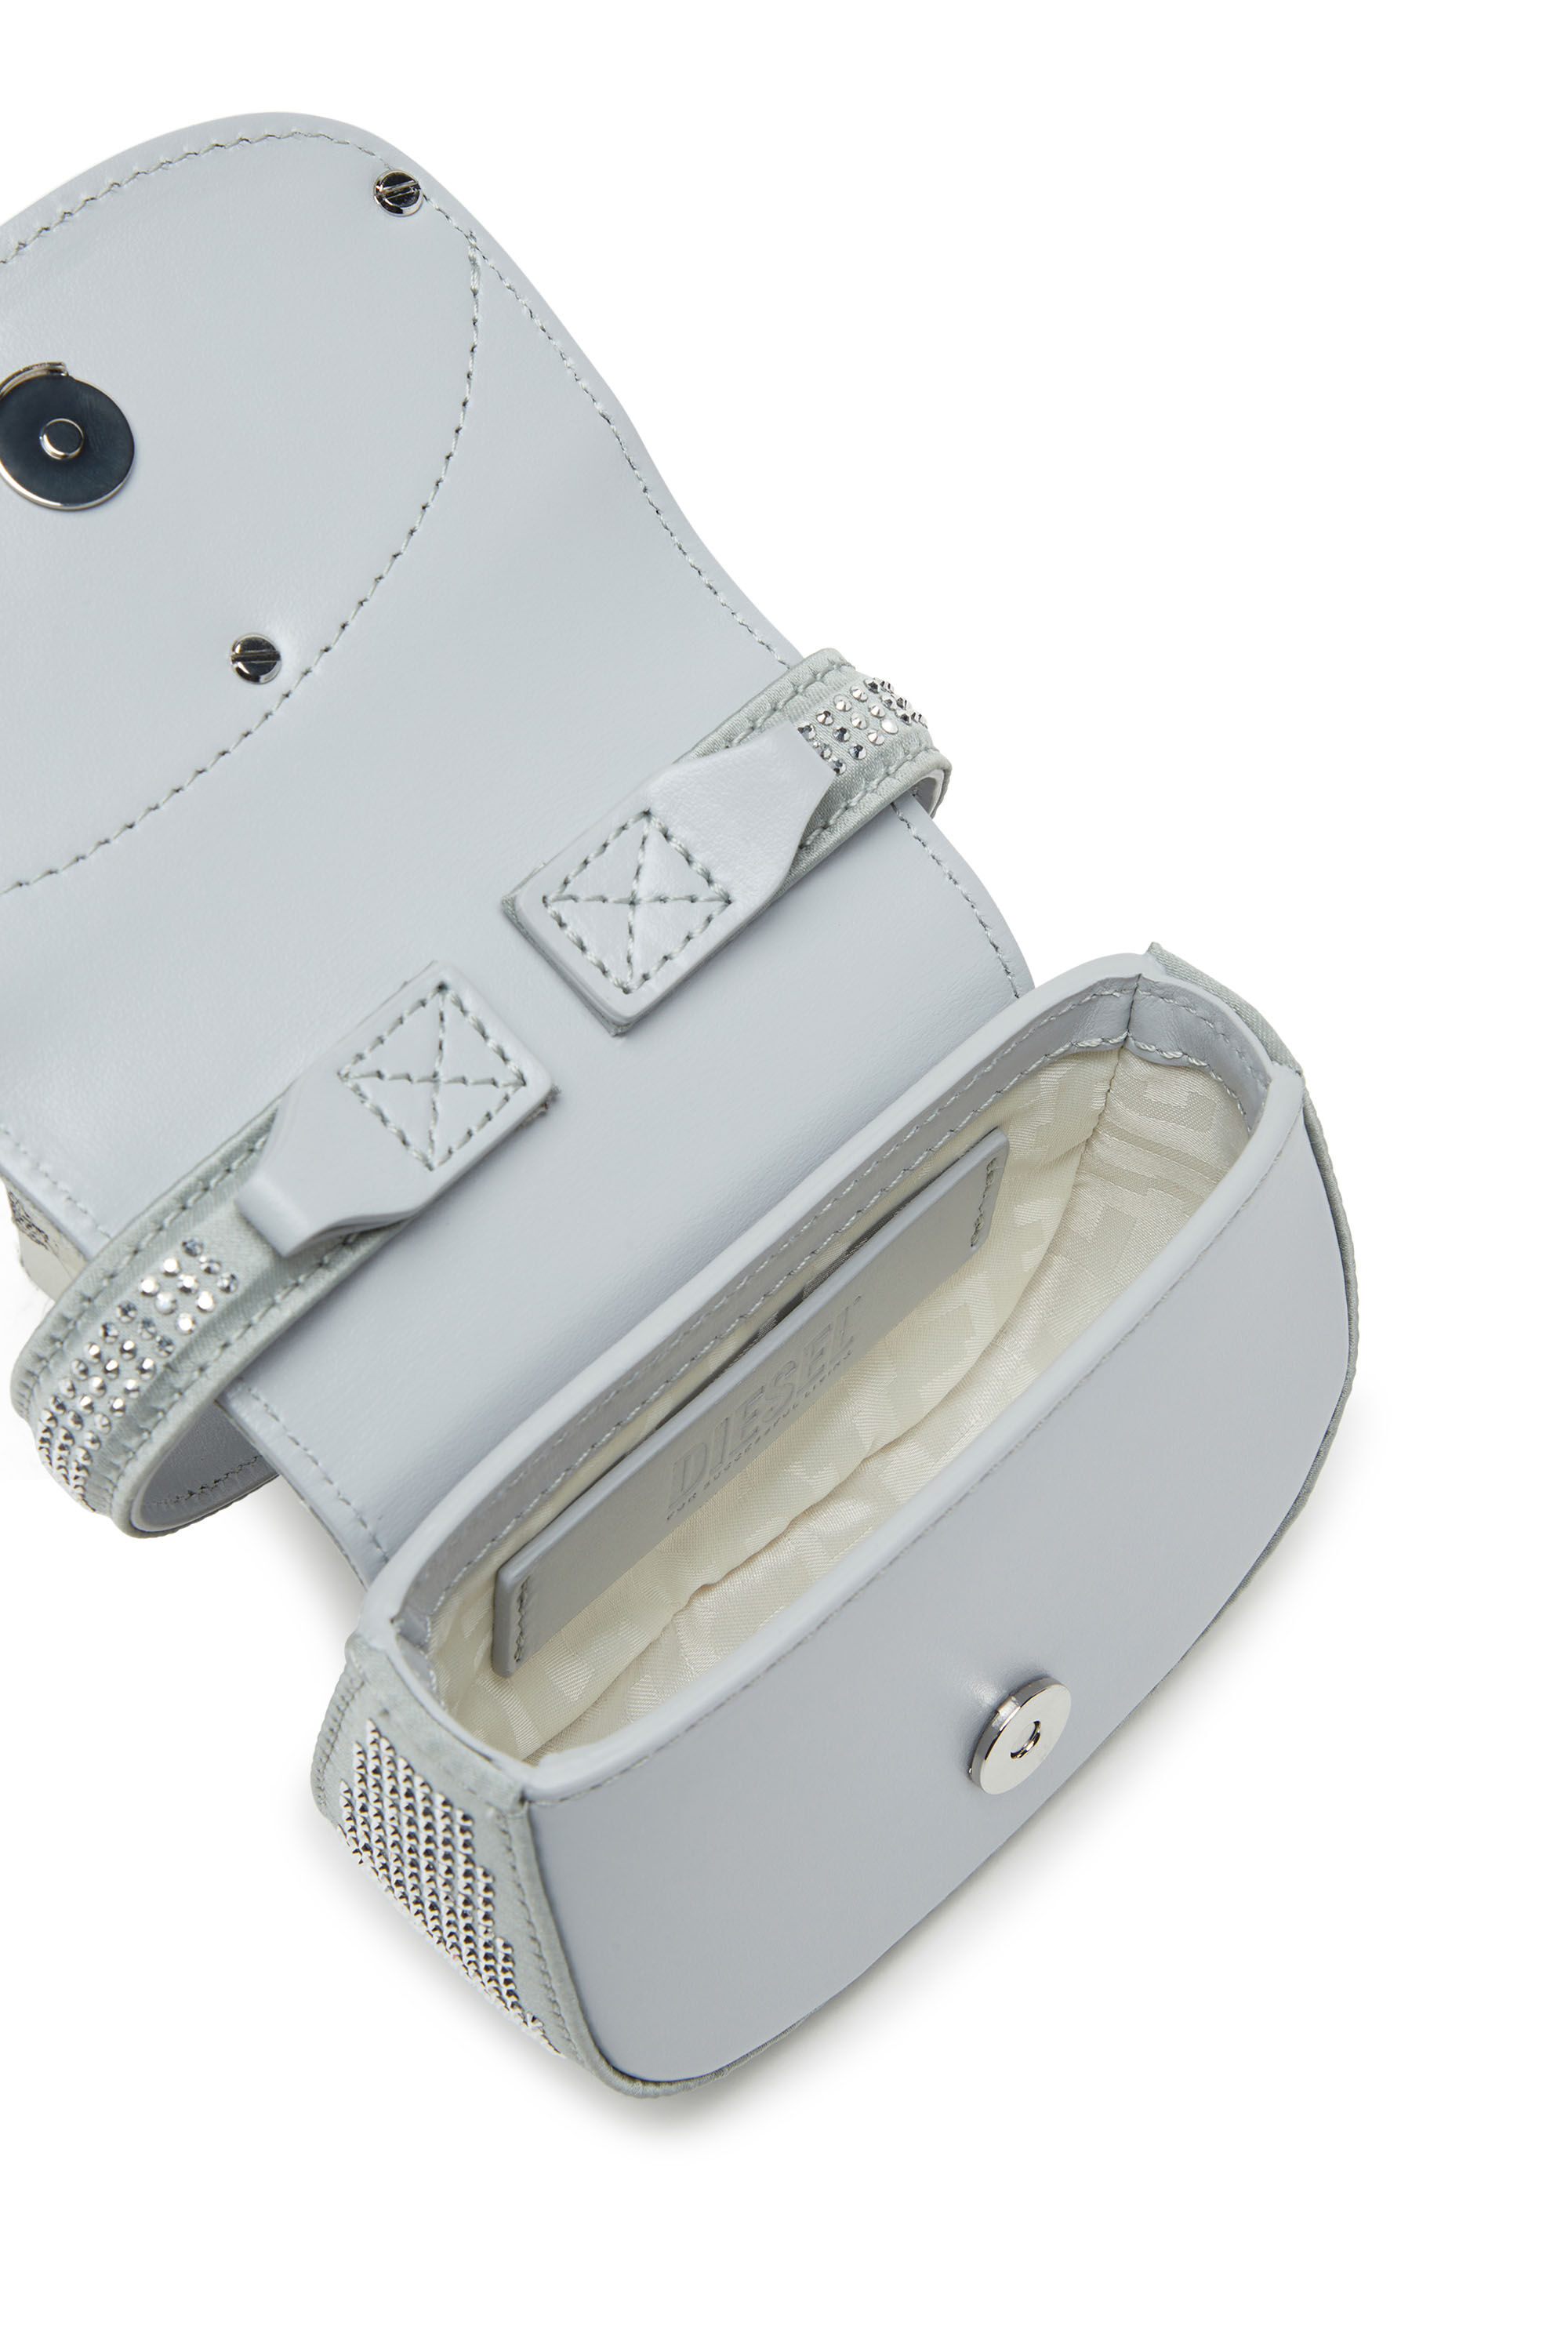 Diesel - 1DR XS, Woman 1DR XS Cross Bodybag - Iconic mini bag in crystal satin in Silver - Image 5